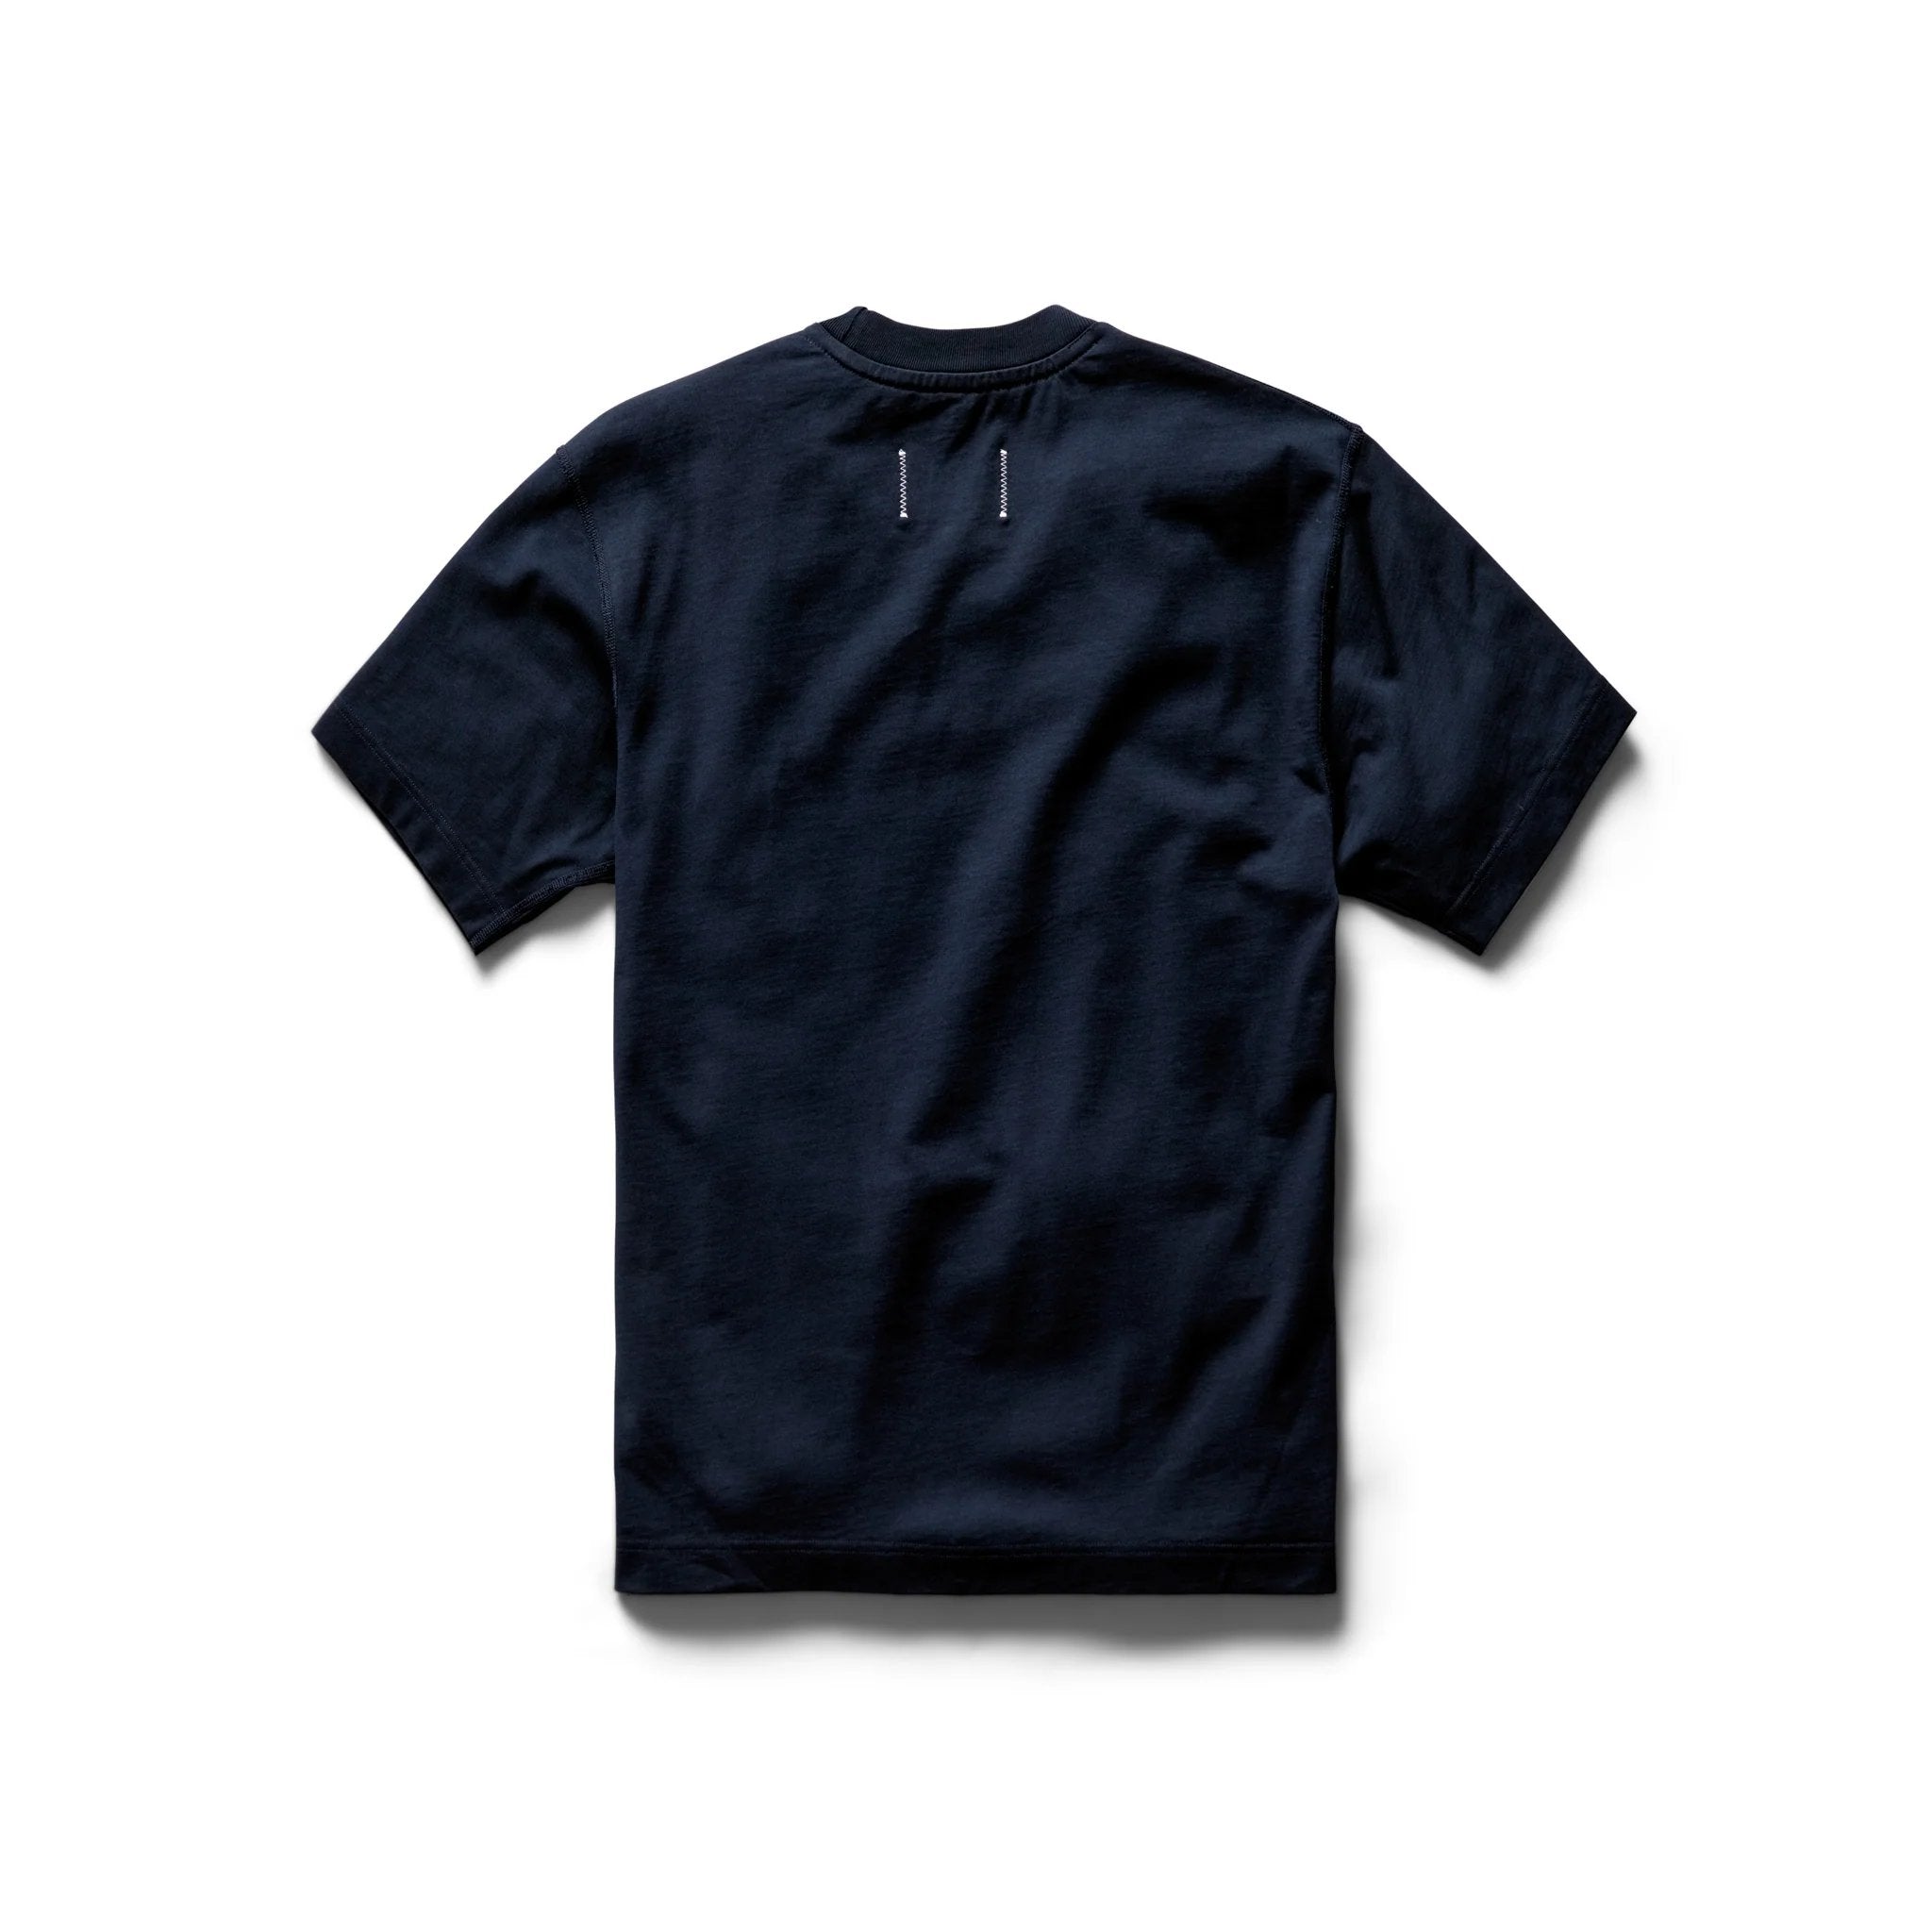 Midweight Jersey T-Shirt - Reigning Champ - Danali - RC-1311-Navy-S